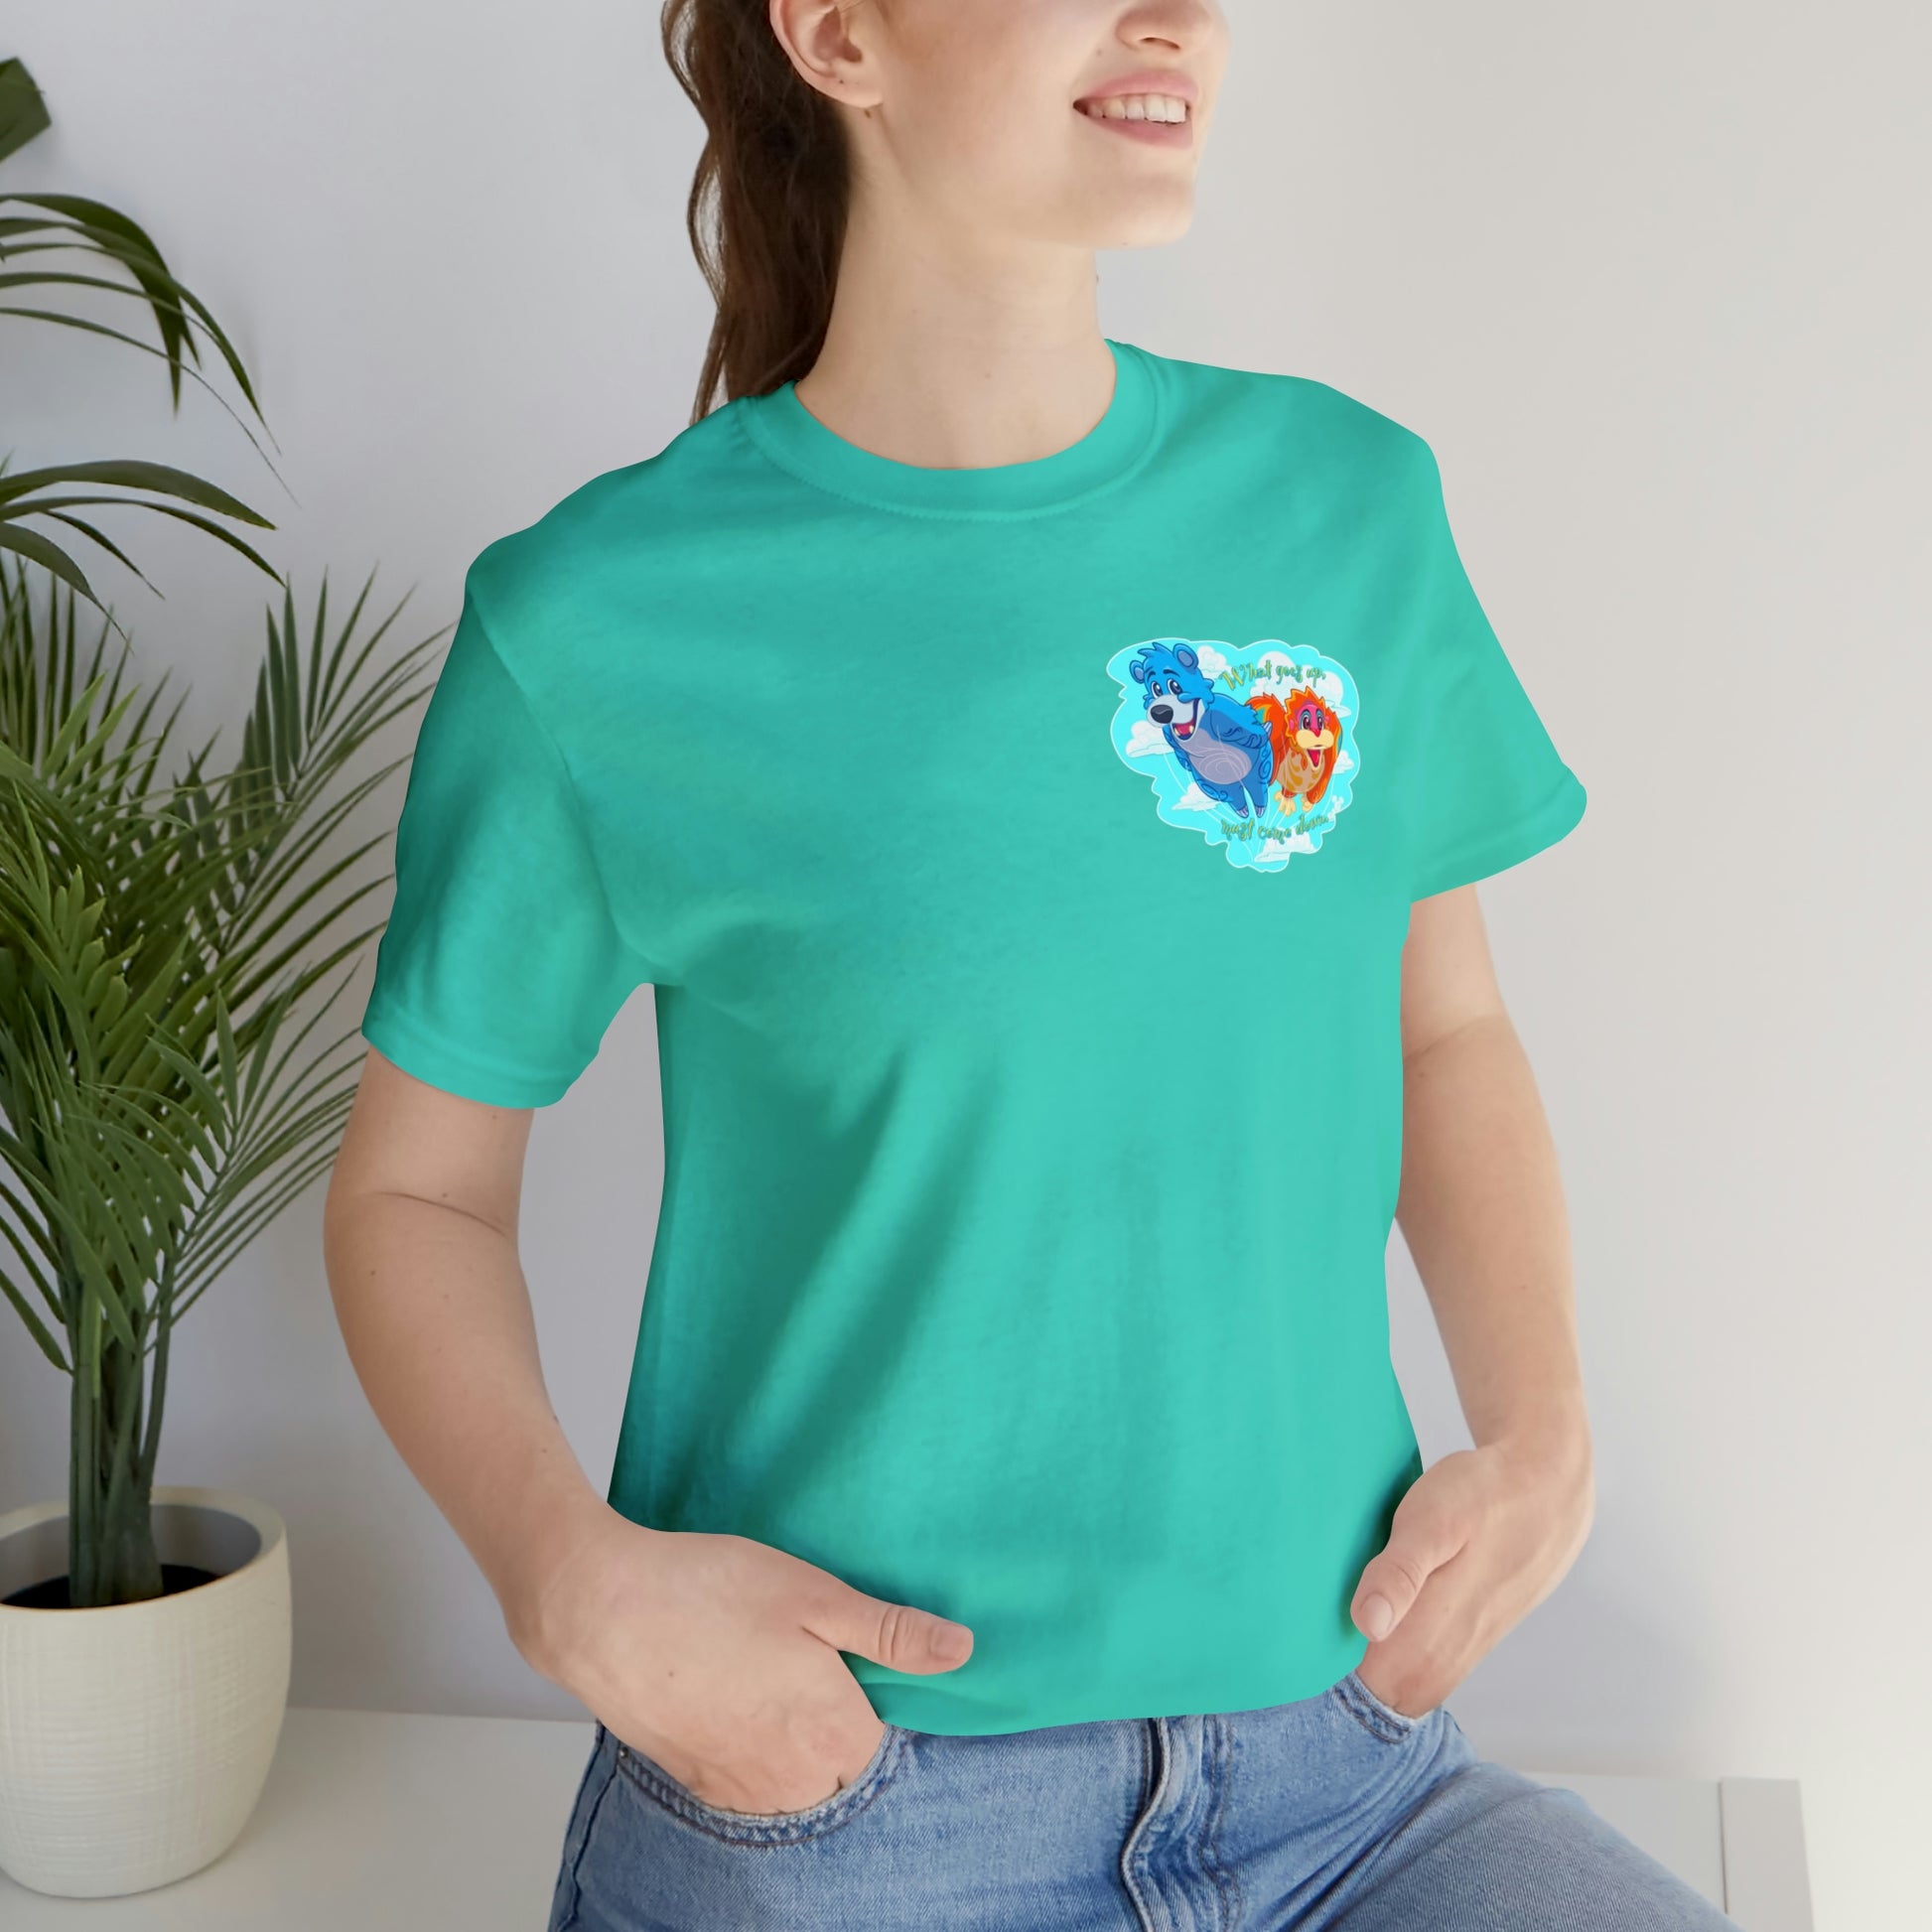 Jungle Book Kite Tails Shirt in Teal 